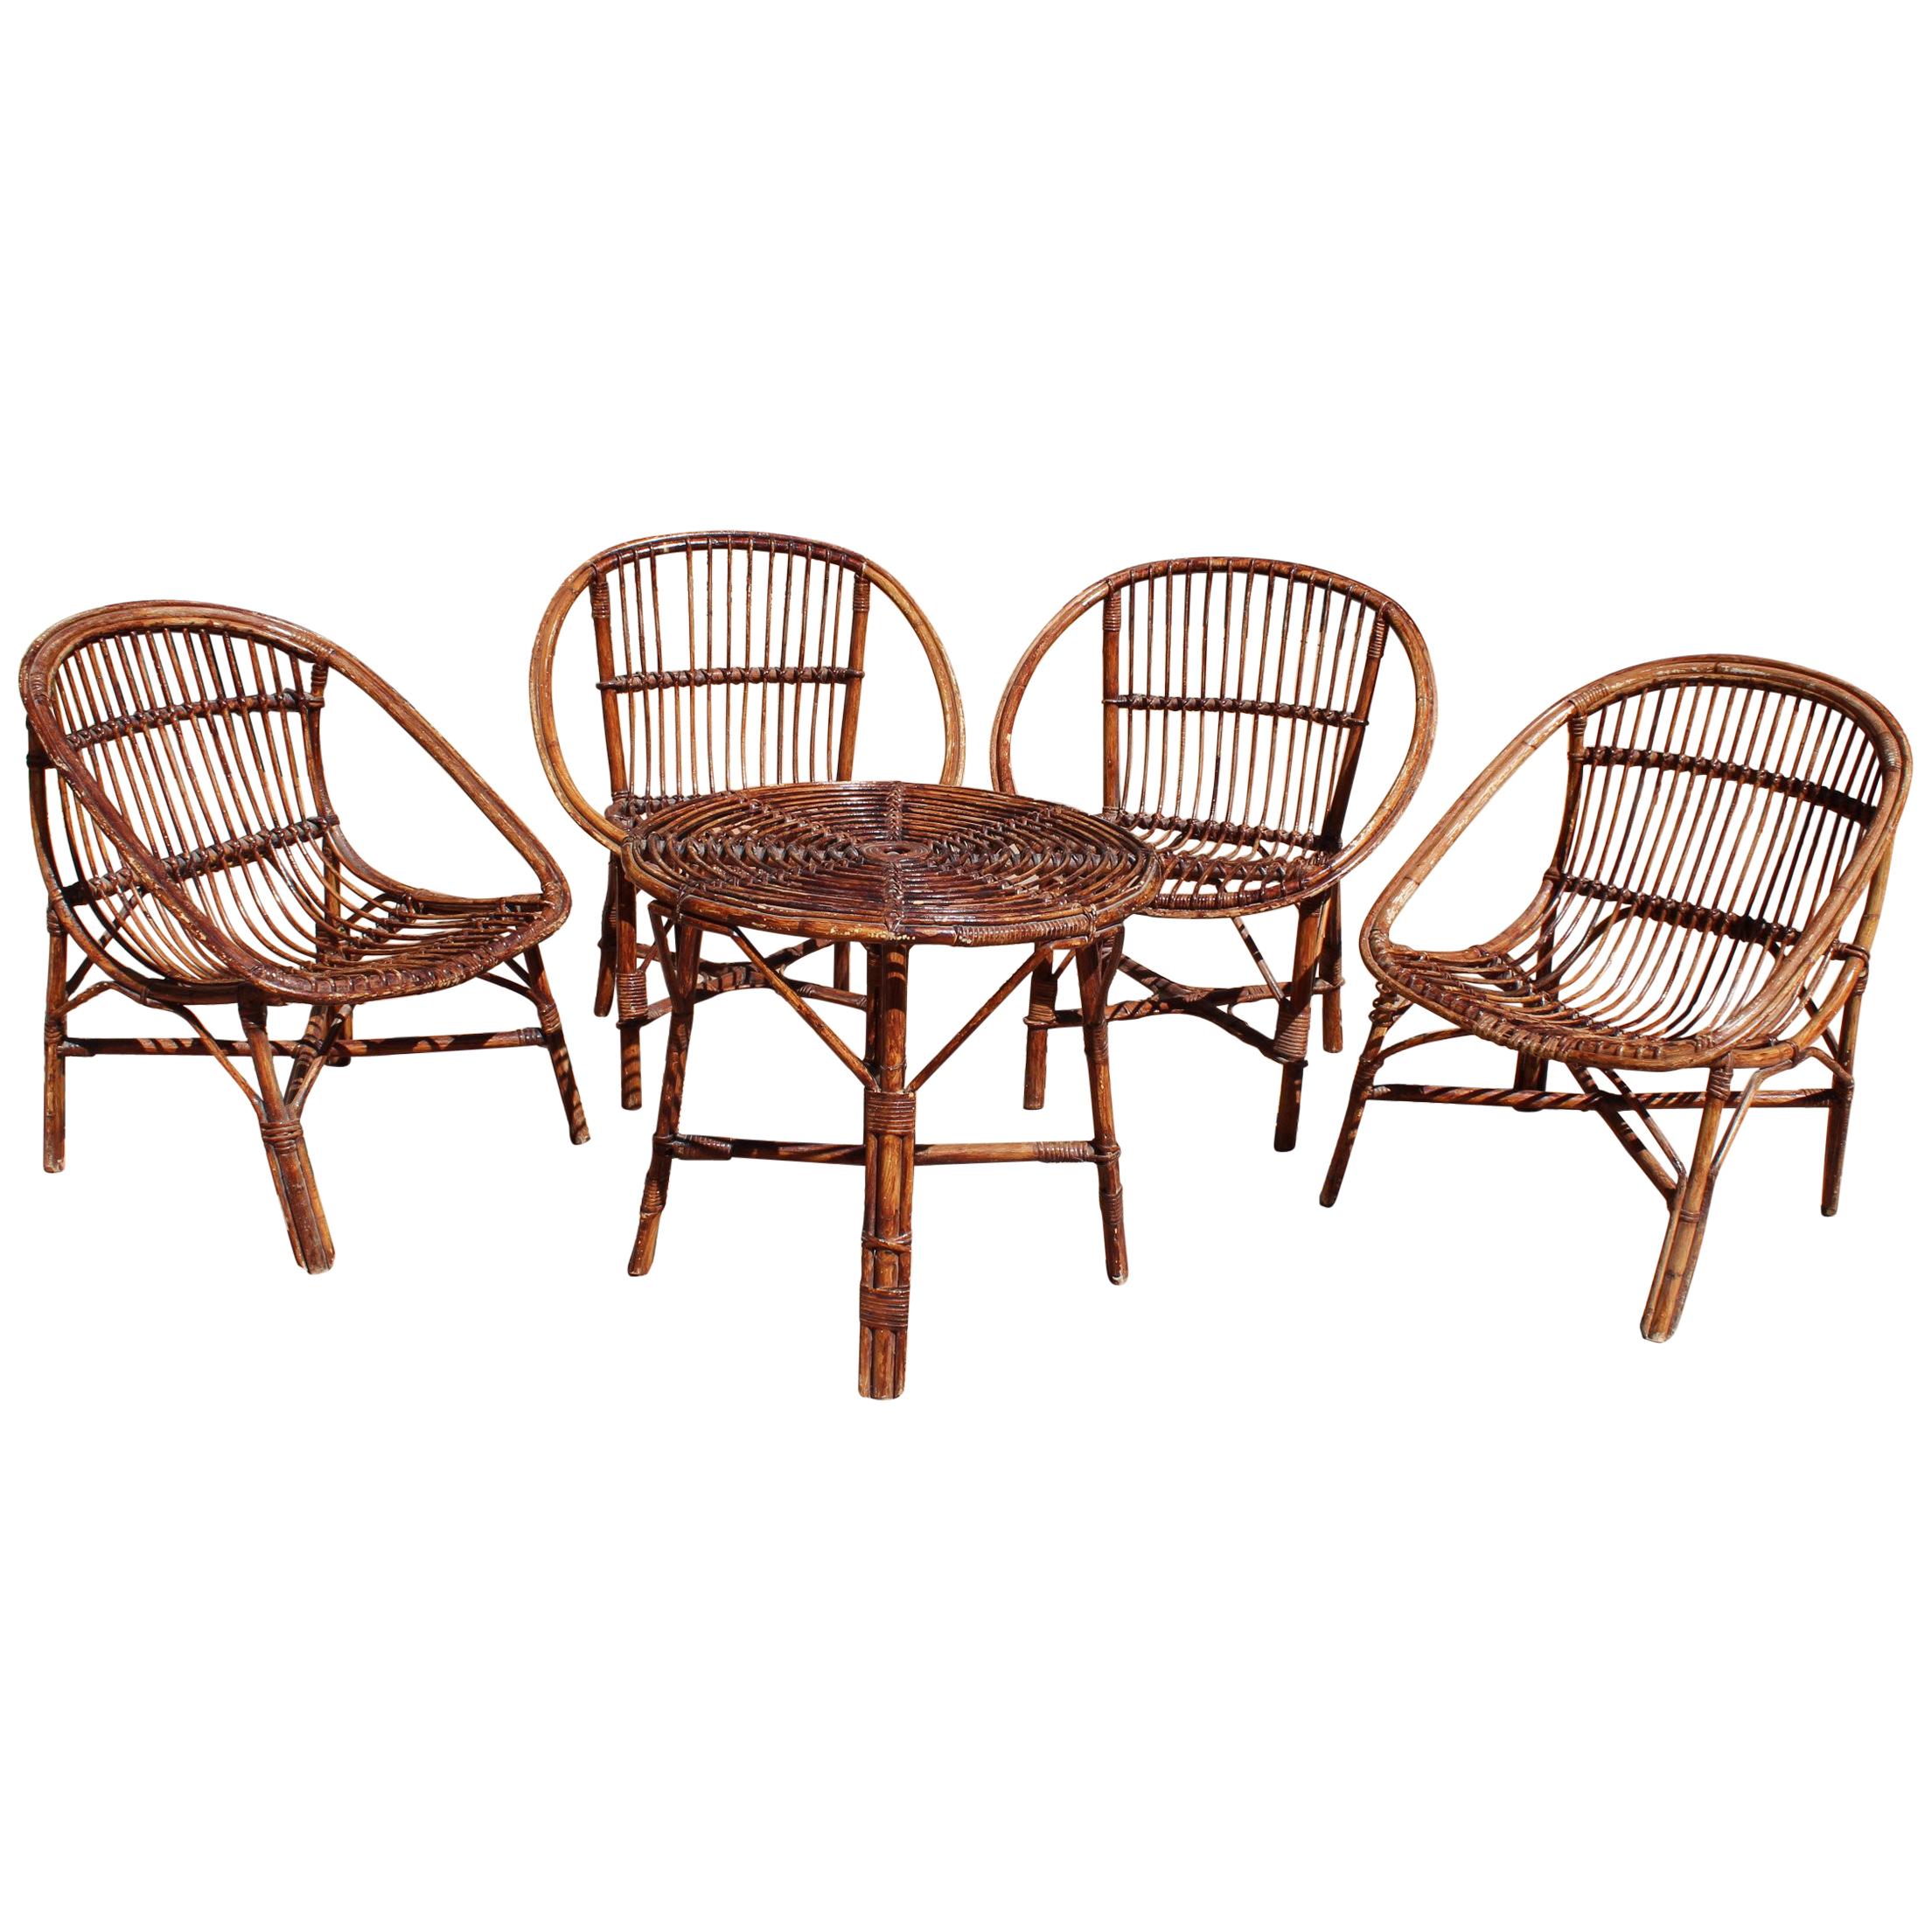 1970s Bamboo Set of Four Chairs and Table